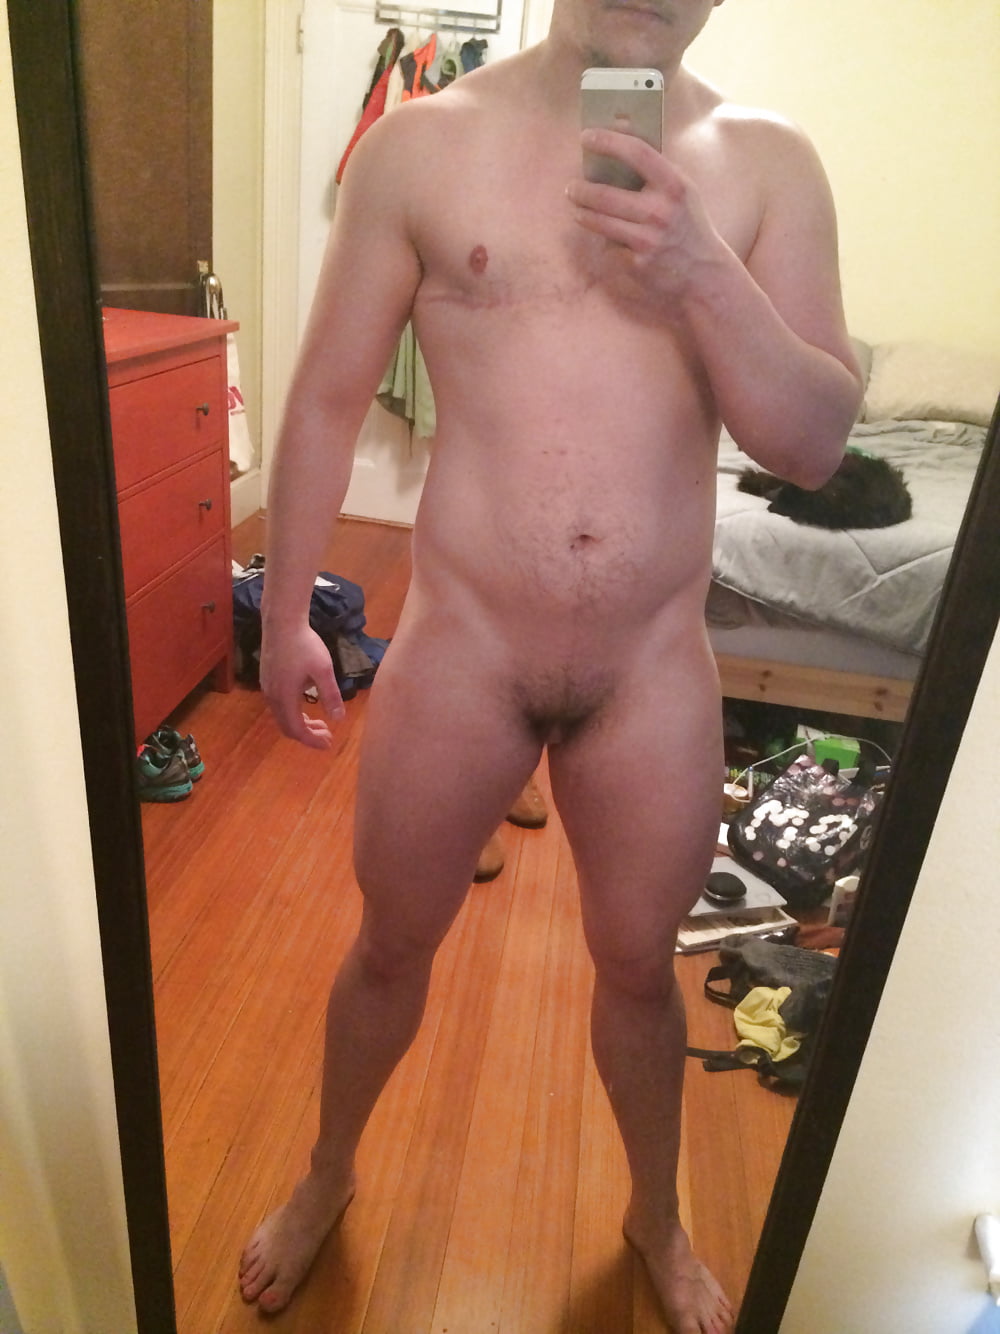 Ftm Female To Male 18 Pics Play Shemale On Nude Beach 21 Min Xxx